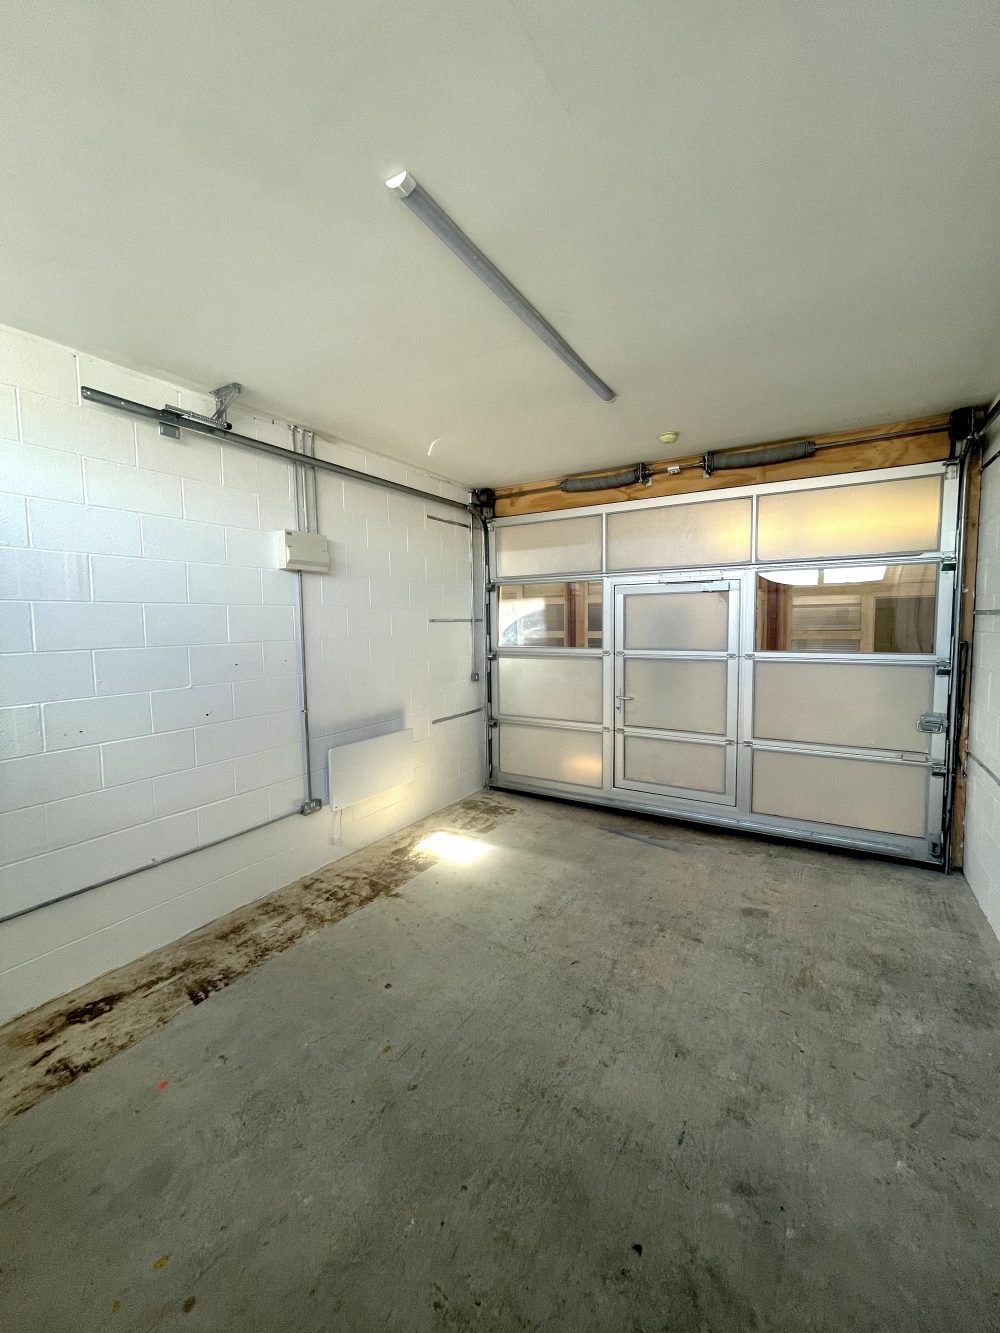 N4 Manor House Eade Road 1st Floor Unit To rent in Creative Warehouse Hub North London141